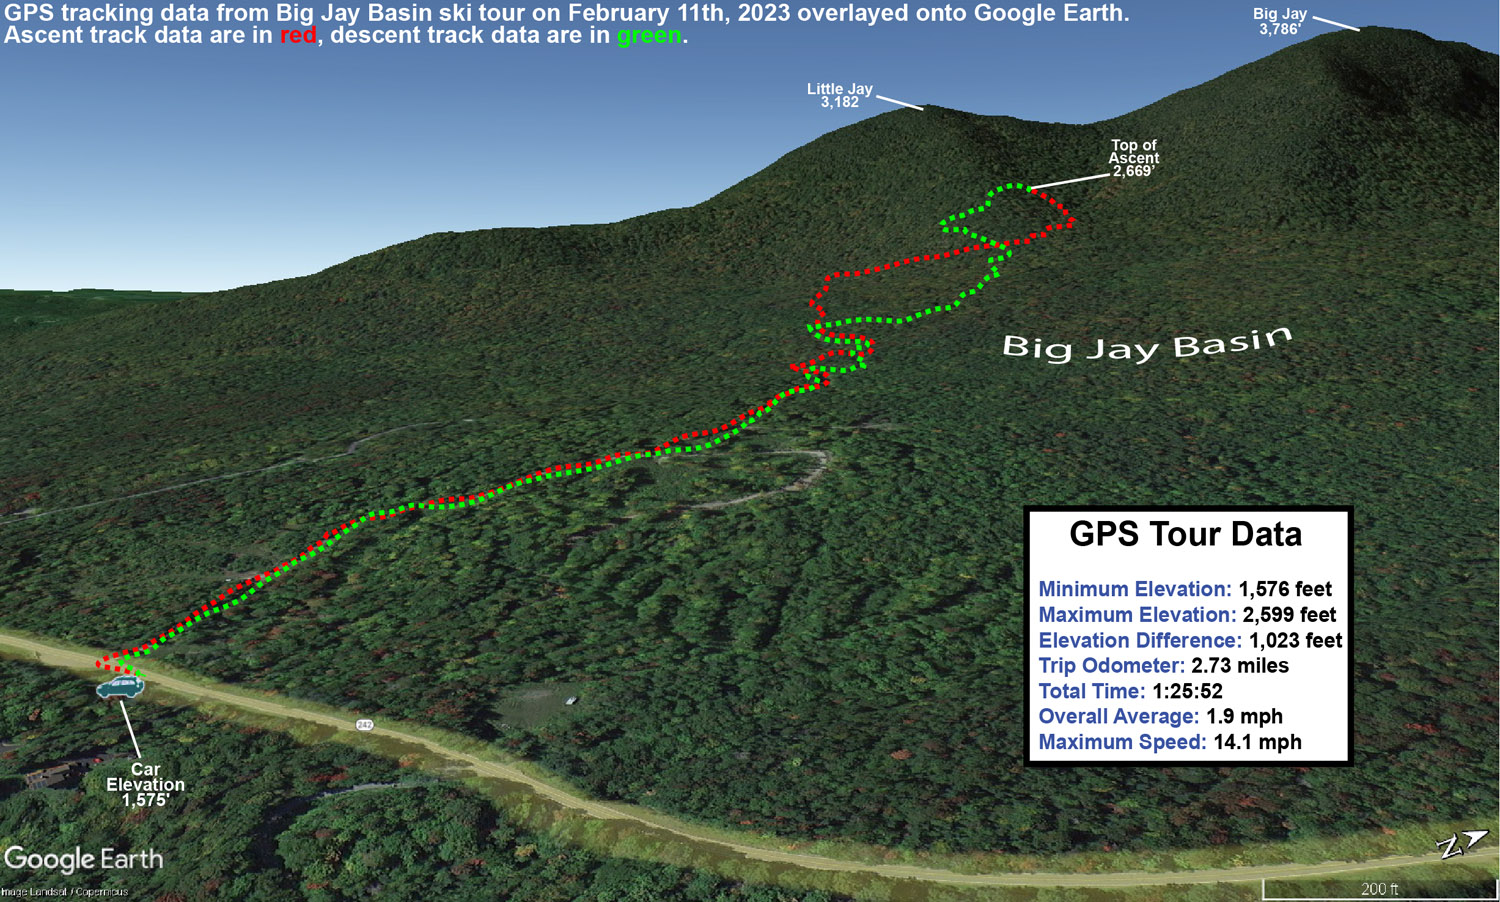 A Google Earth map with GPS tracking data from a ski tour in the Big Jay Basin area of Vermont